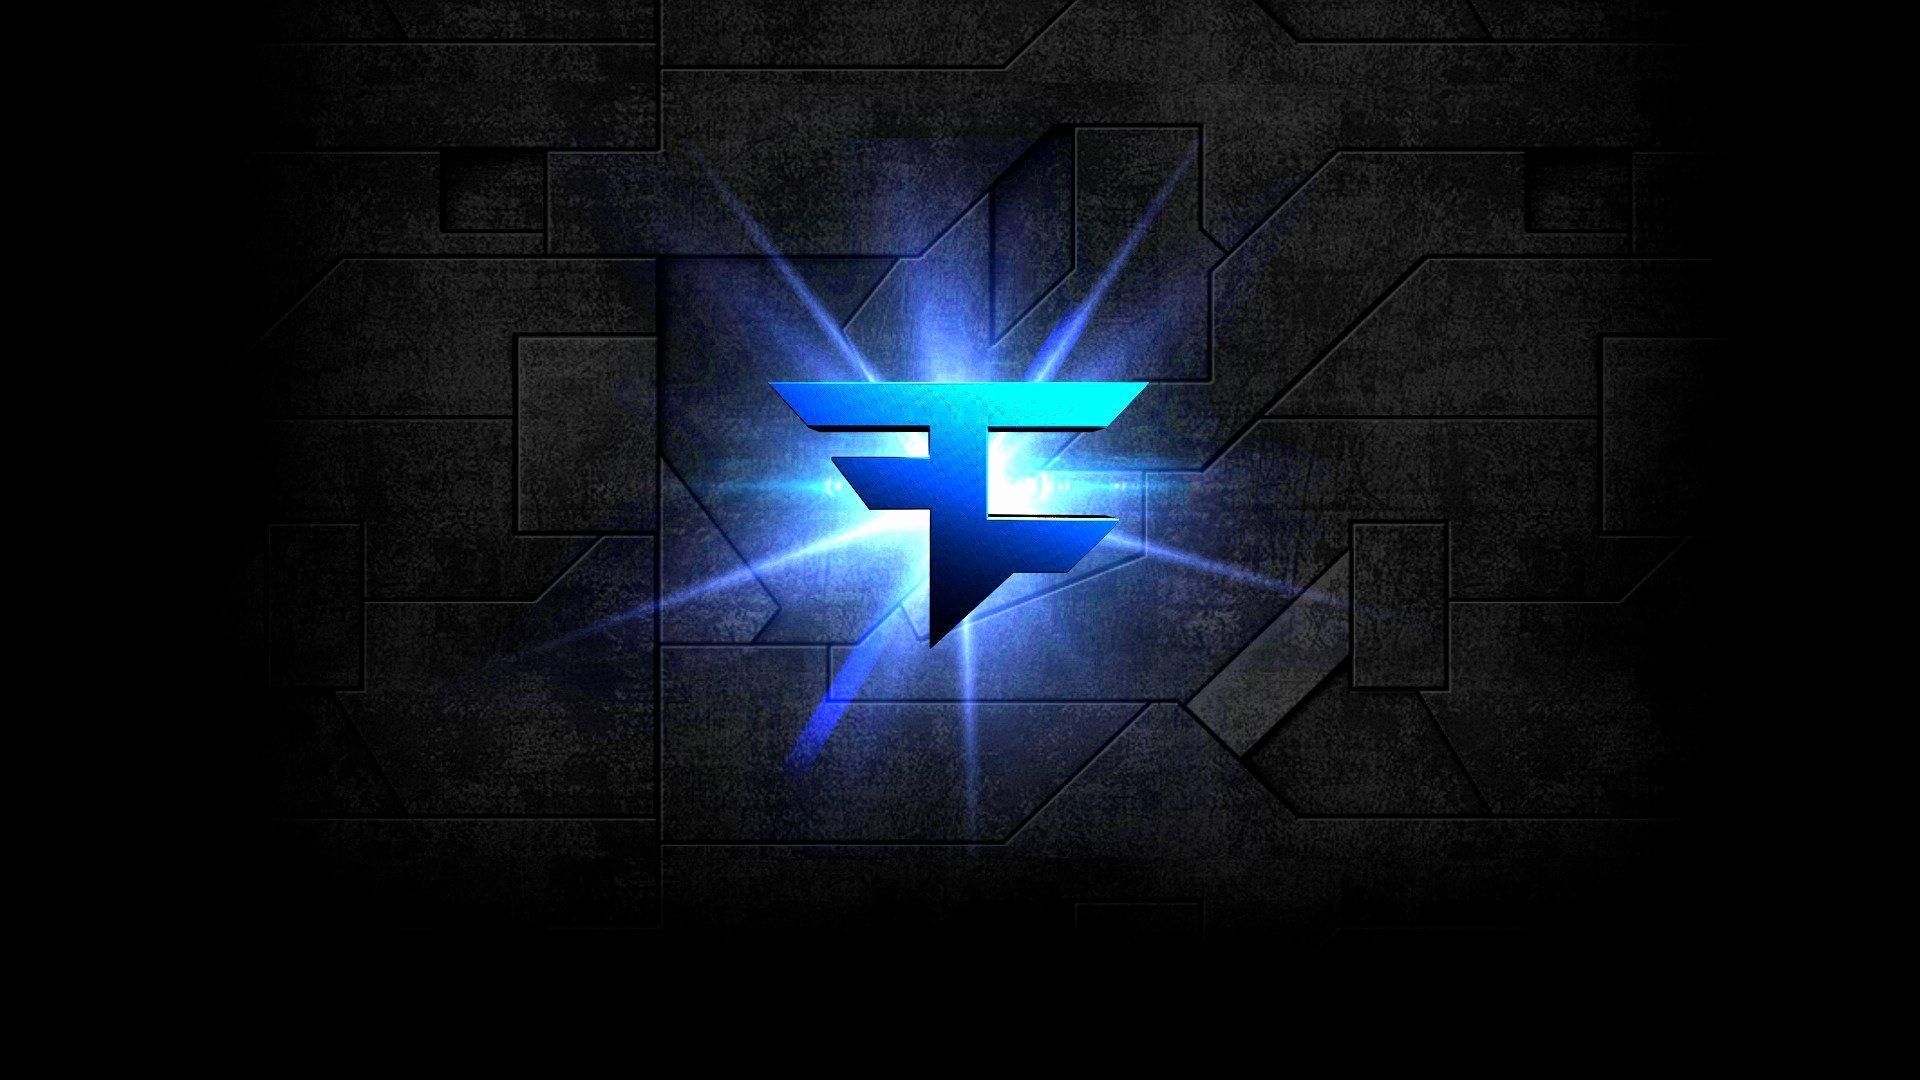 Awesome Faze Logo Wallpaper Of the Day of The Hudson